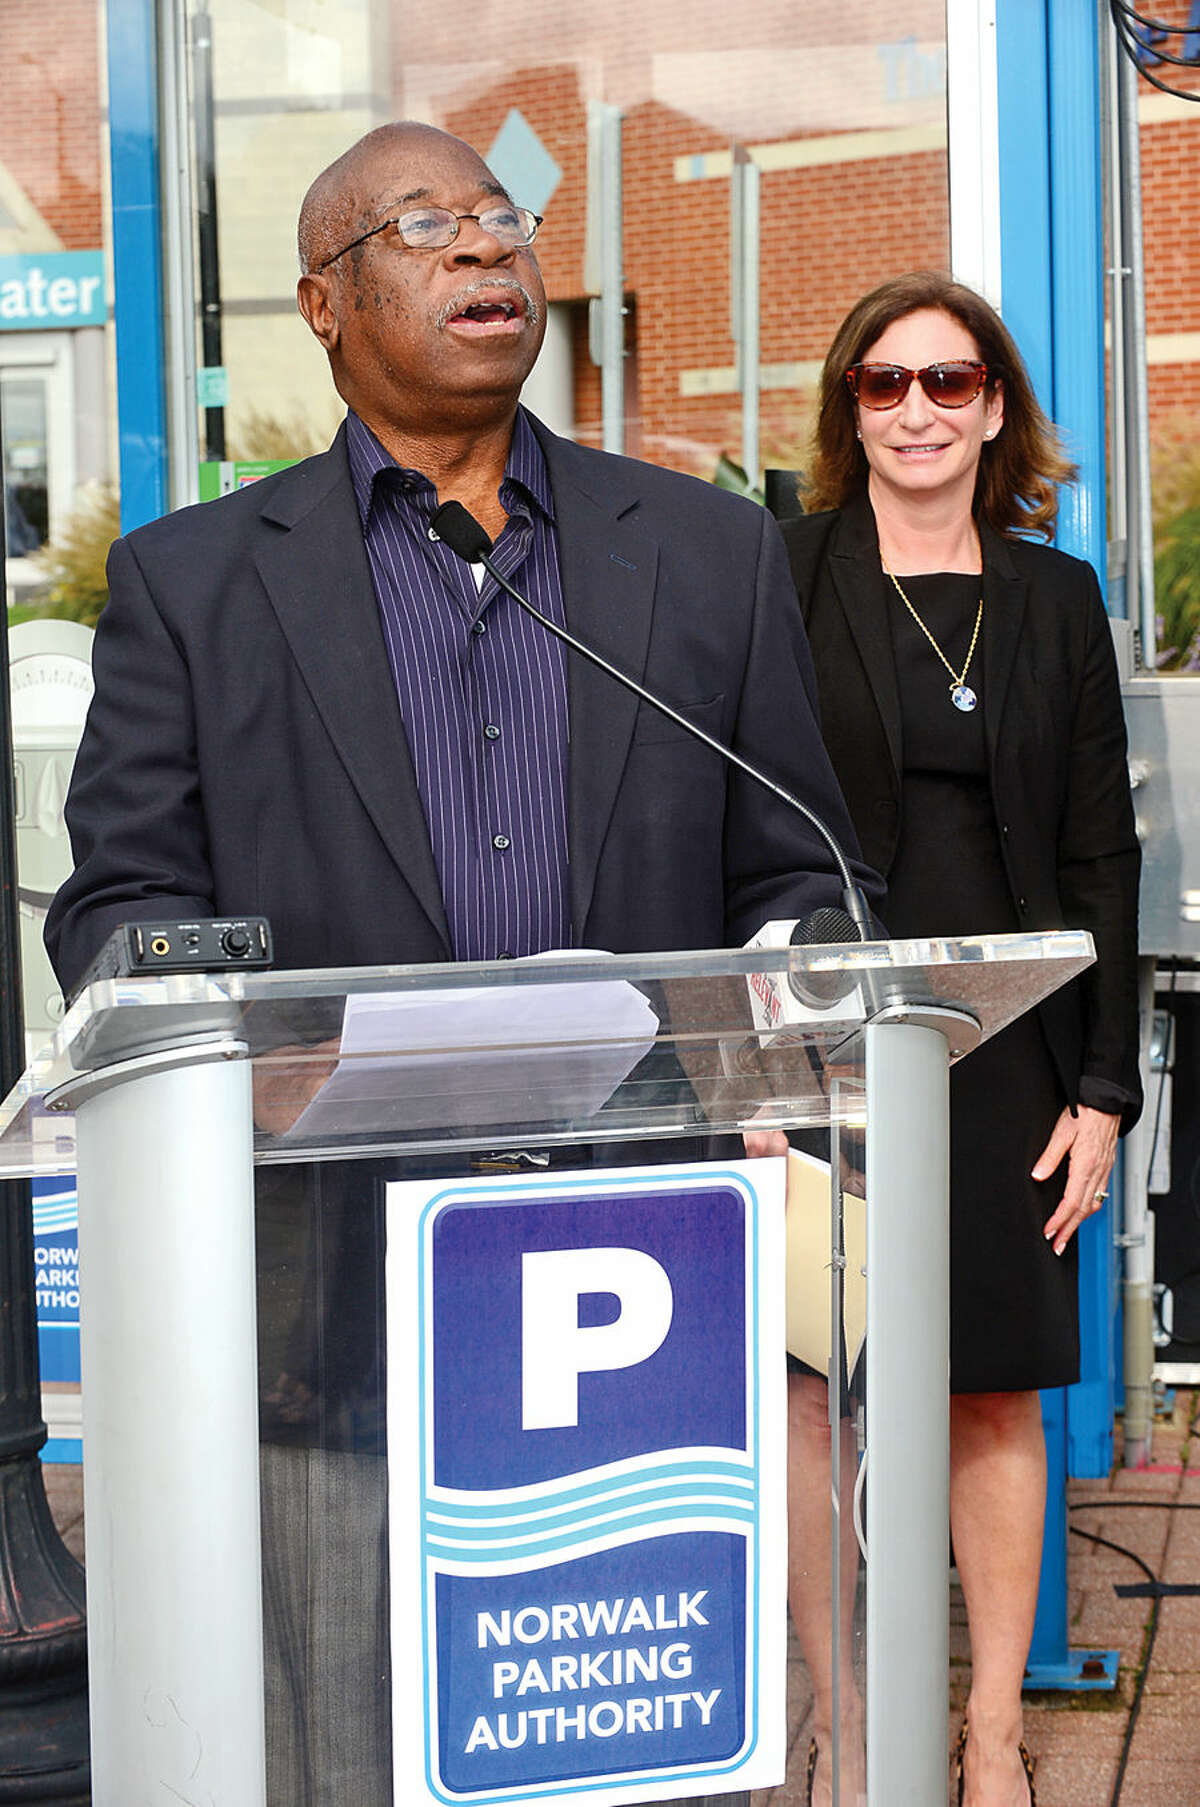 Hour photo / Erik Trautmann Julius Hayward, Chairman of the Norwalk Parking Authority speaks during a press conference at the North Water St lot Tuesday as the Authority announces a new digital initiative that allows access to parking availability information with the smart phone application, Parker. The system works via wireless sensors that are embedded in parking space to detect whether or not the space is occupied. Data from each sensor is relayed via wireless to the cloud and pushed into an easy-to-use app showing real-time parking availability. CASE parking, a parking data solutions provider, will collect occupancy data from the lots and garages. Streetline, the leading global provider of sensor-based smart parking technology, has outfitted the on-street parking spaces with sensors. The data from both systems will be streamed directly into Streetline's mobile app, Parker.